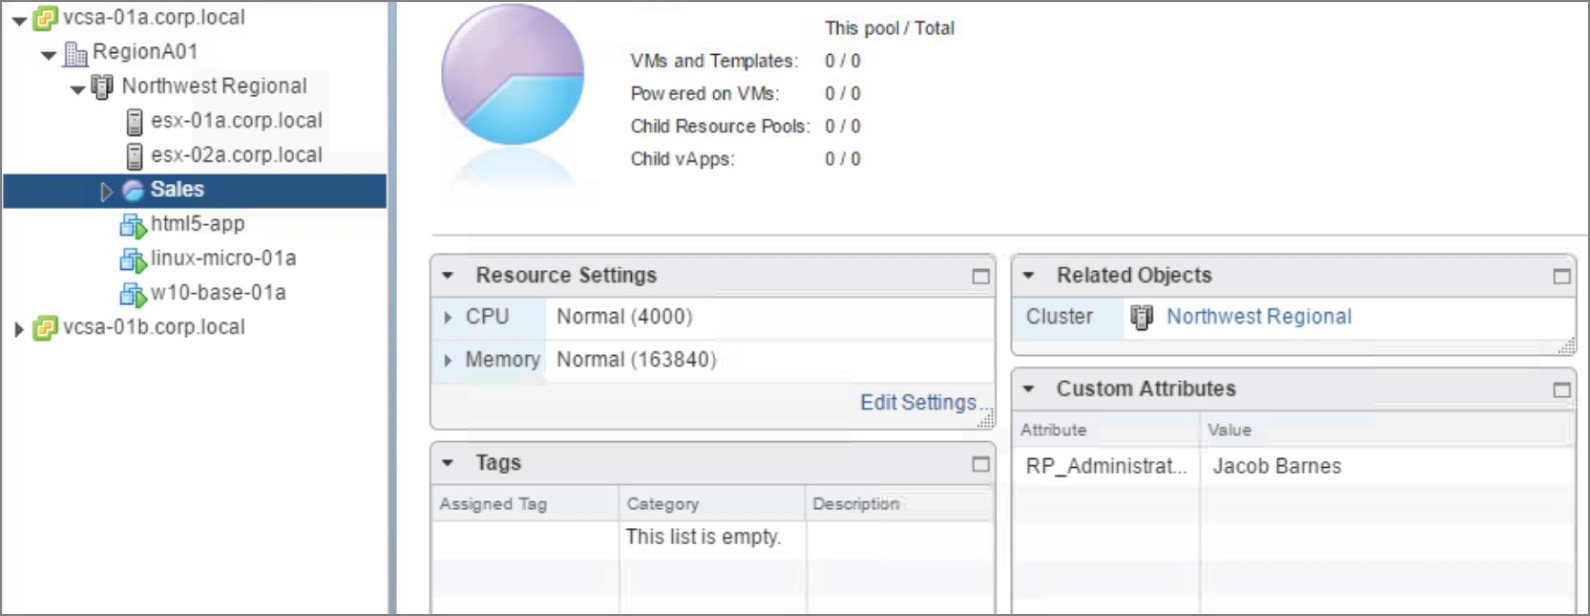 Snapshot of the summary page of the Sales resource pool showing the new custom attribute in the relevant panel.